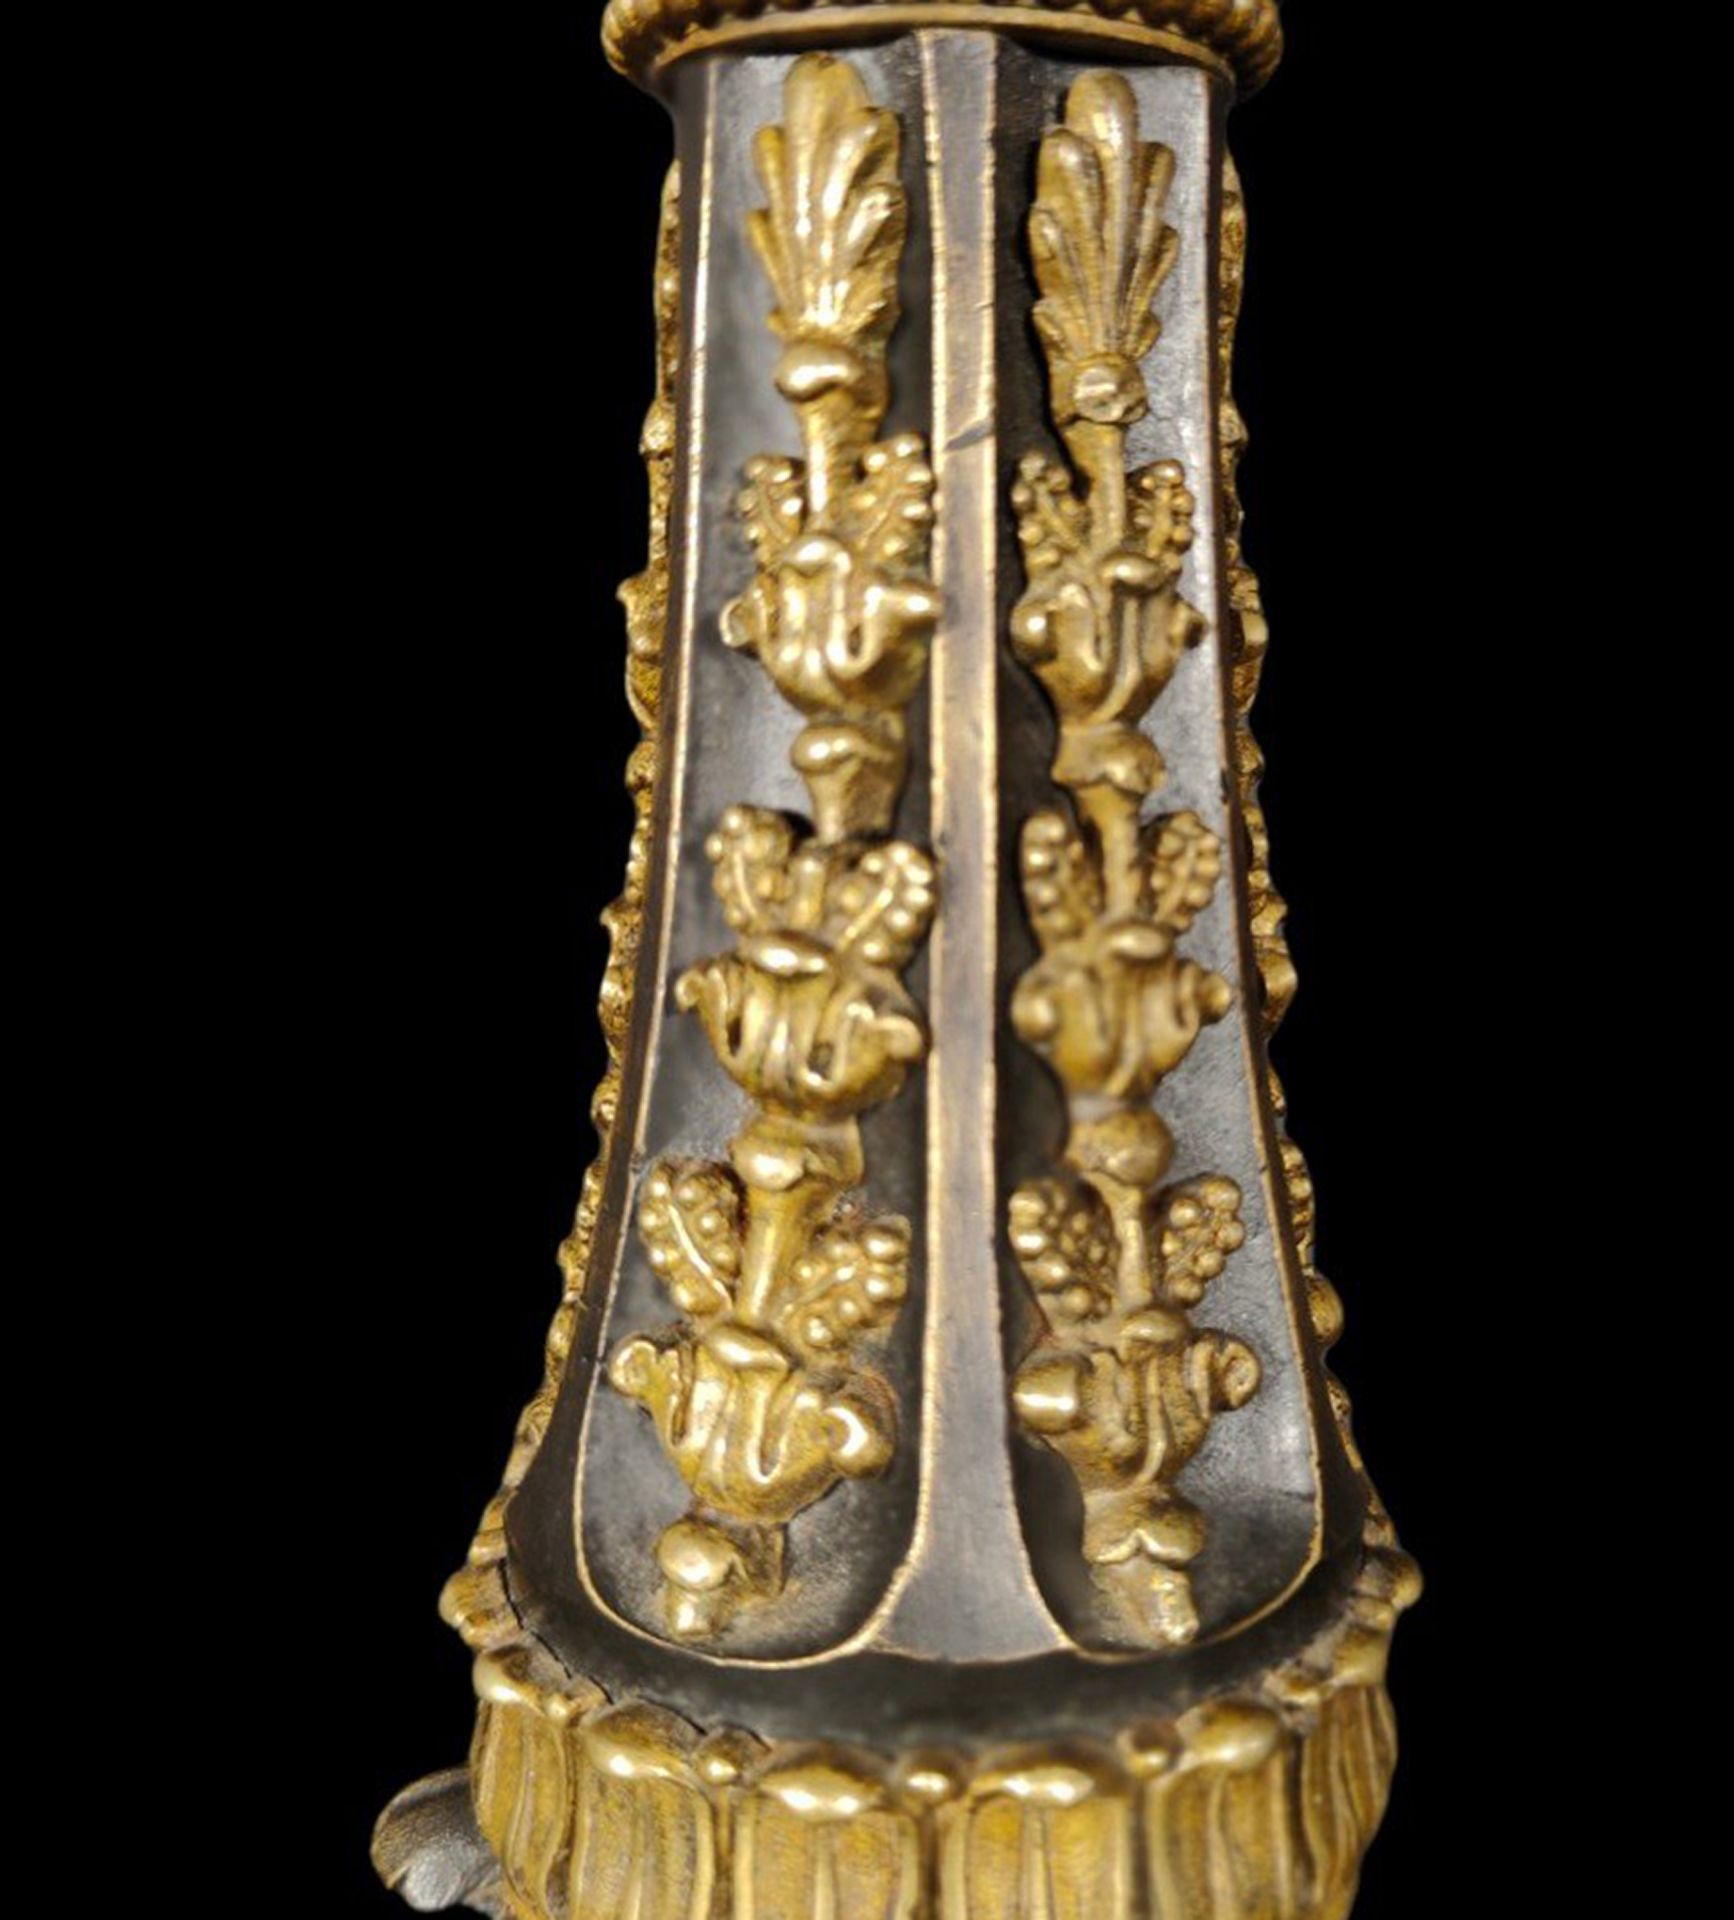 Pair of 19th century French candlesticks in gilt bronze - Image 5 of 10